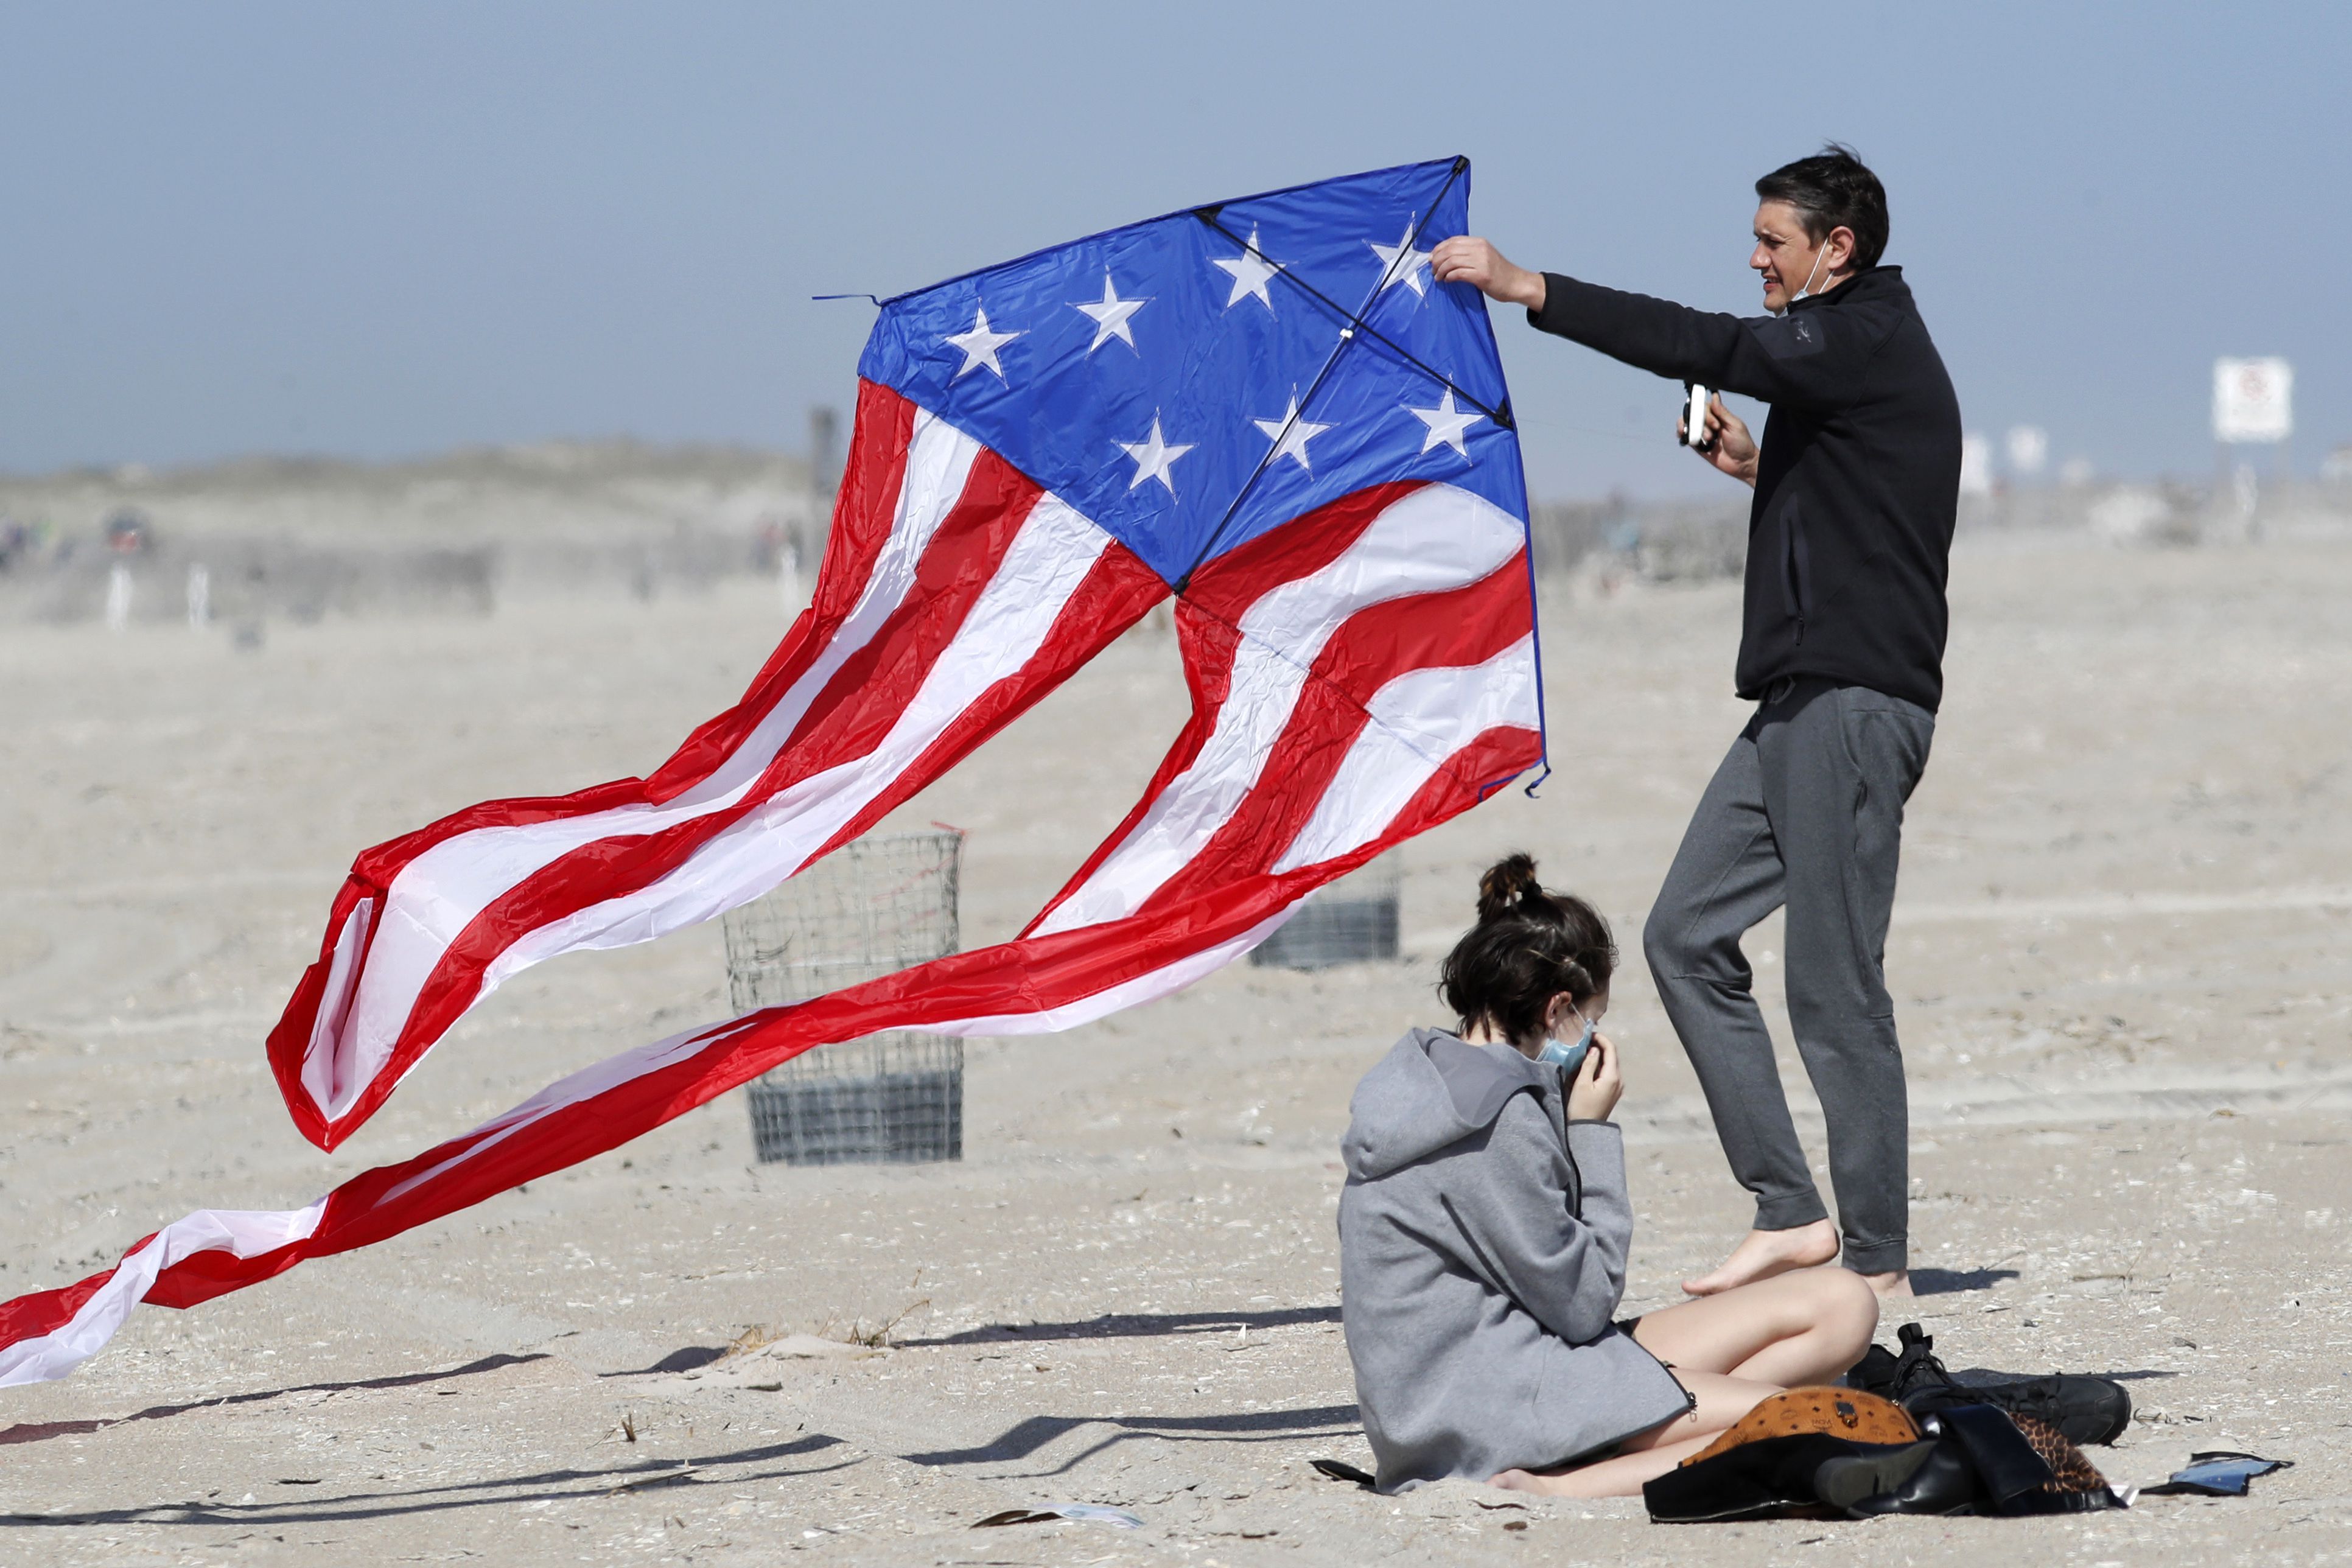 In this image, a man holds a kite on a beach as a woman sits next to him 